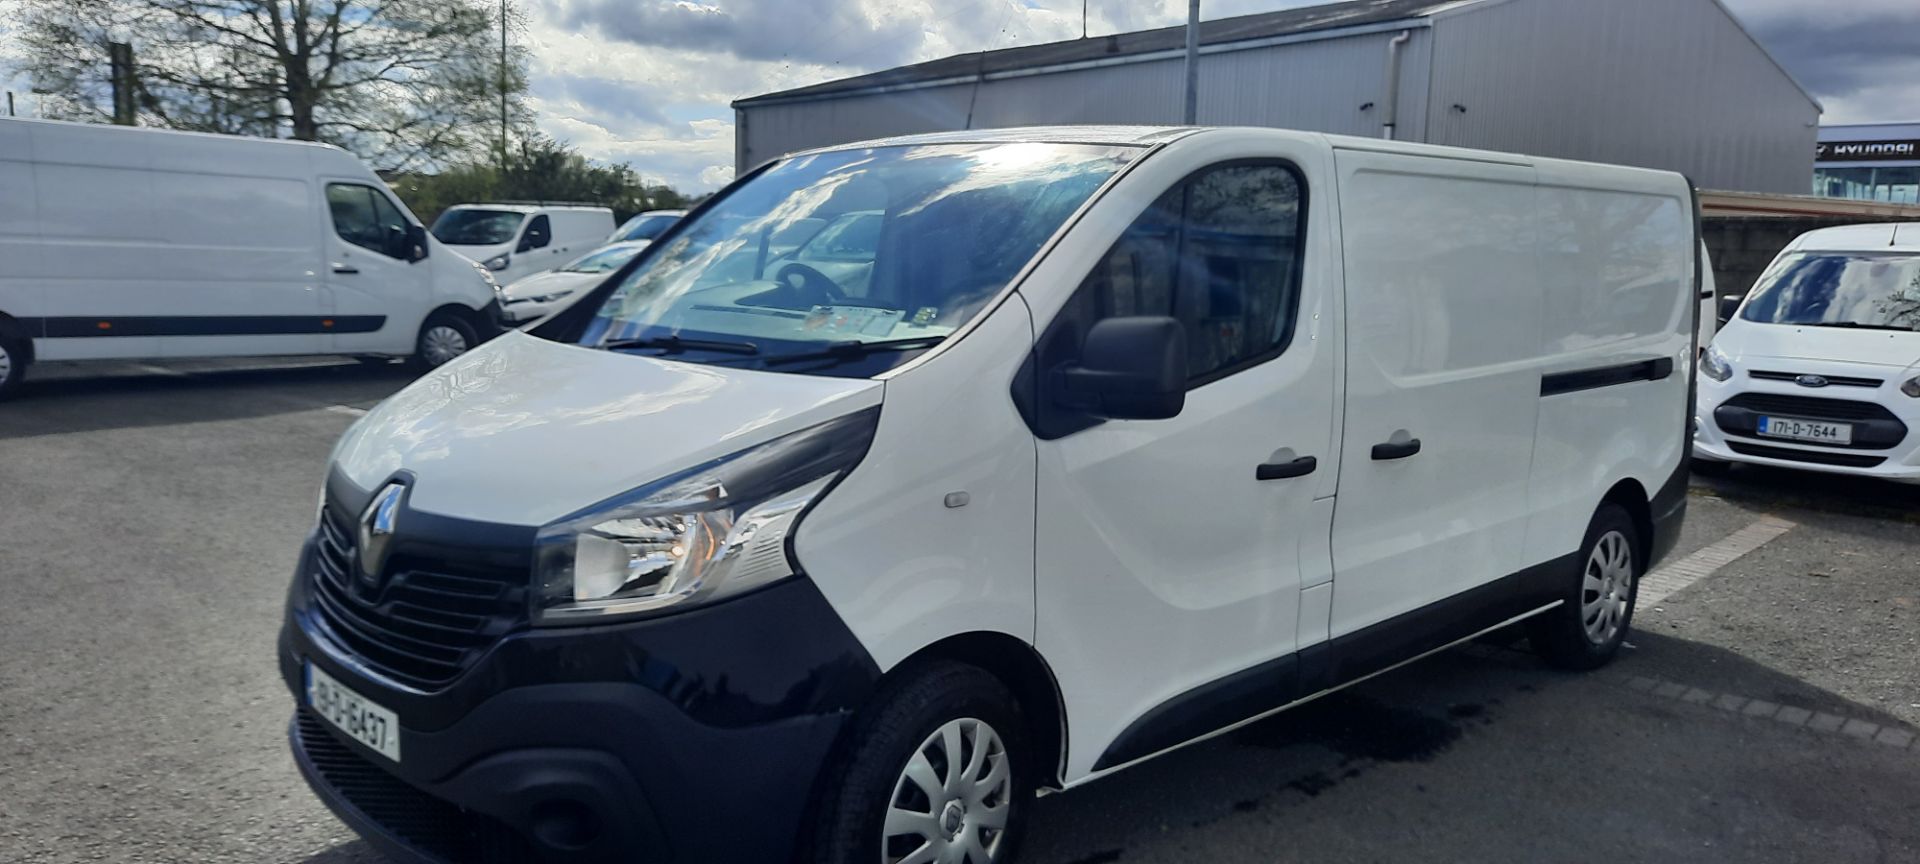 2019 Renault Trafic LL29 DCI 120 Business (191D16437) Thumbnail 7